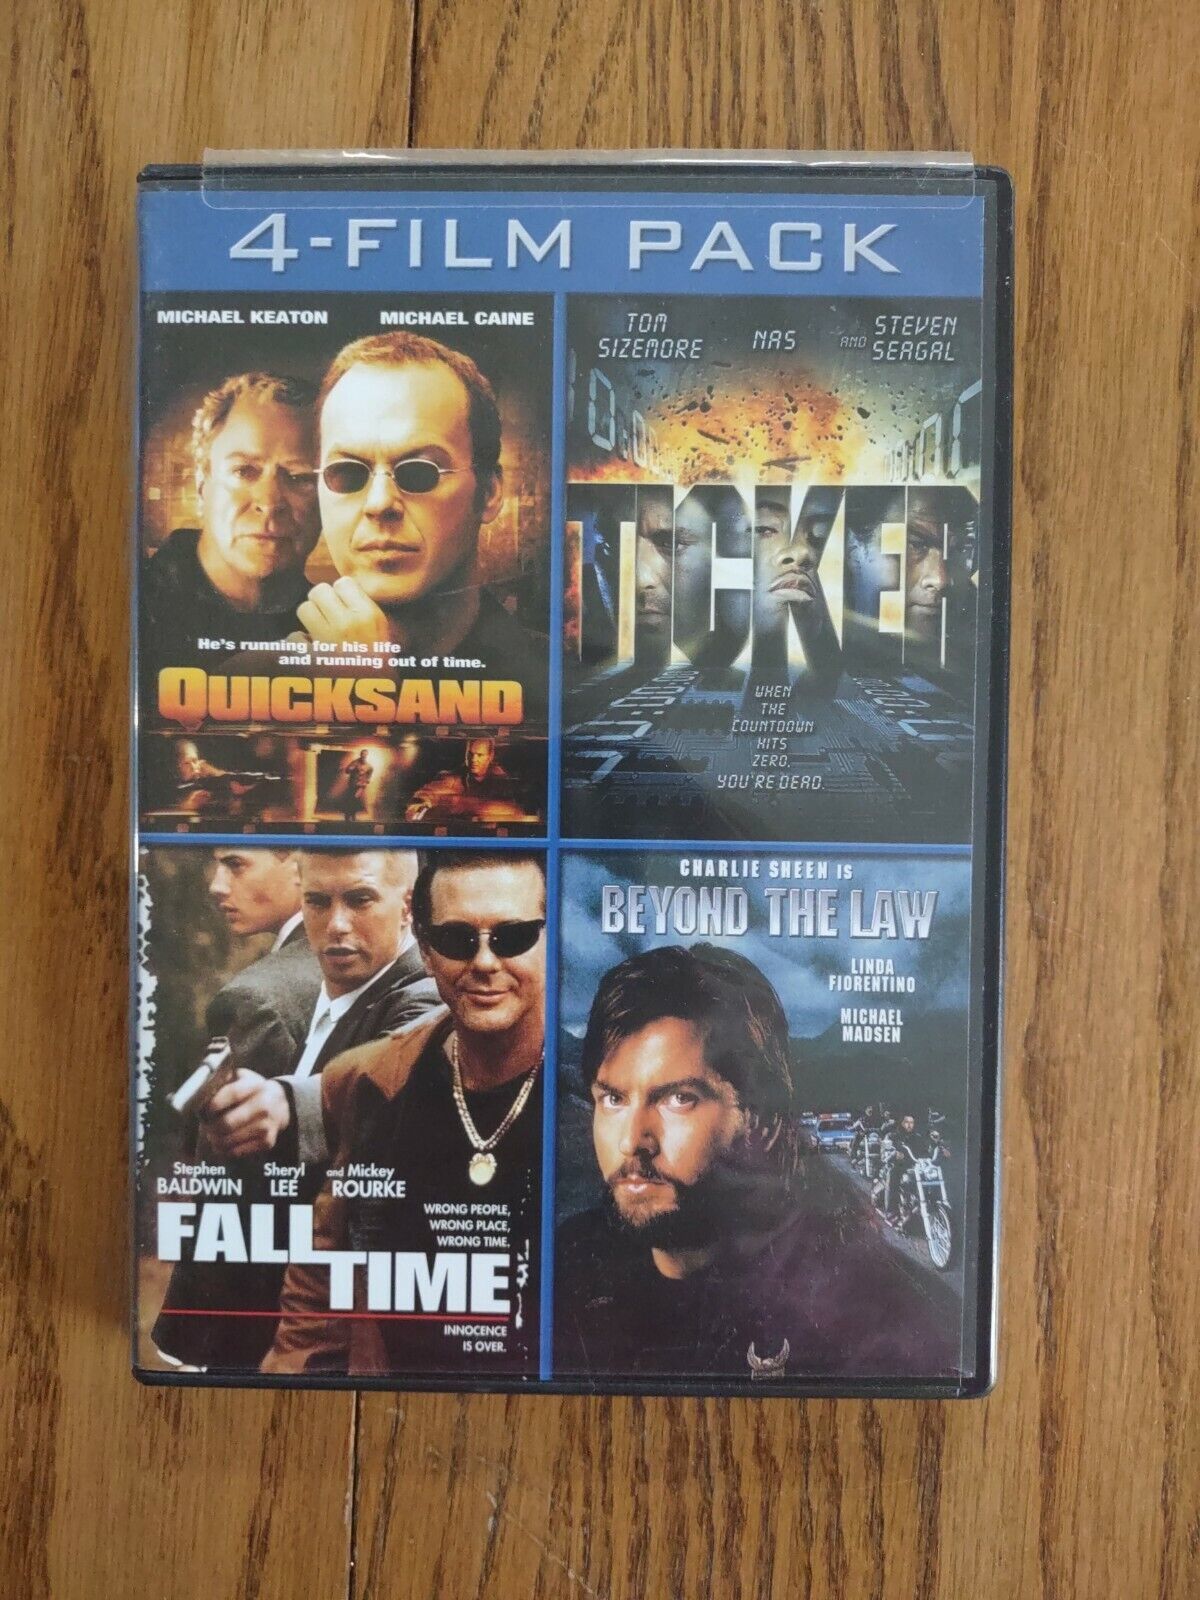 Primary image for 4 Film Pack: Quicksand, Ticker, Fall Time, & Beyond The Law DVD, ,